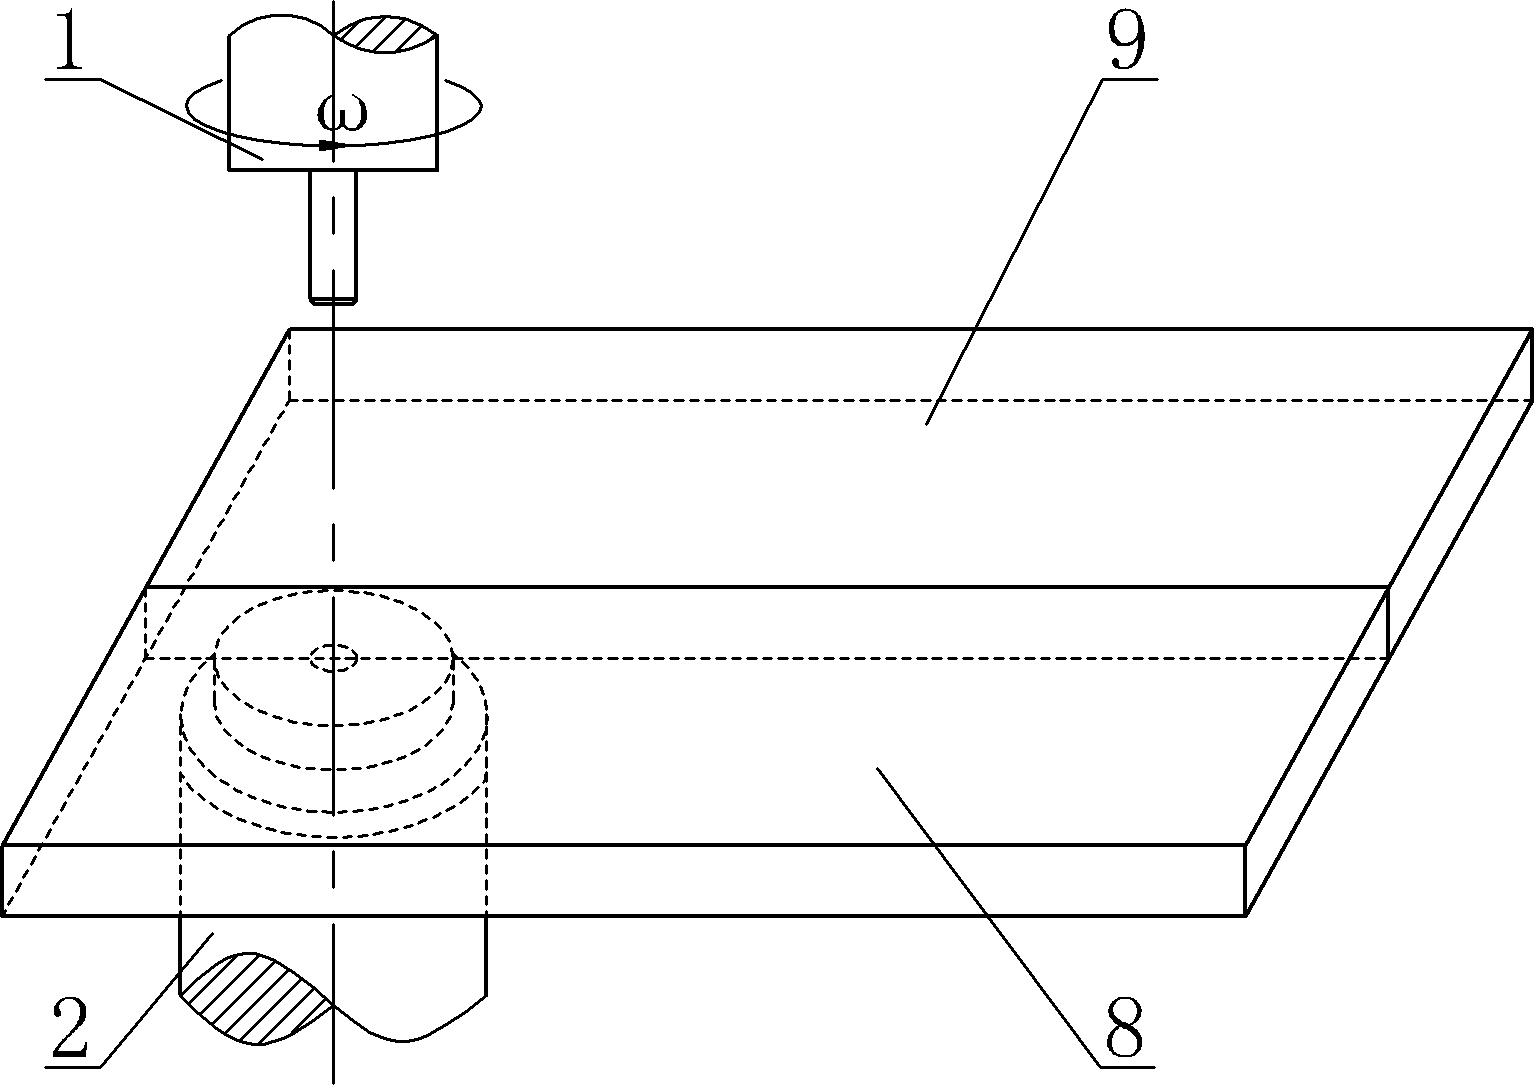 Self-sustaining friction stir welding stirring head with irrotational lower shaft shoulder and welding method of stirring head